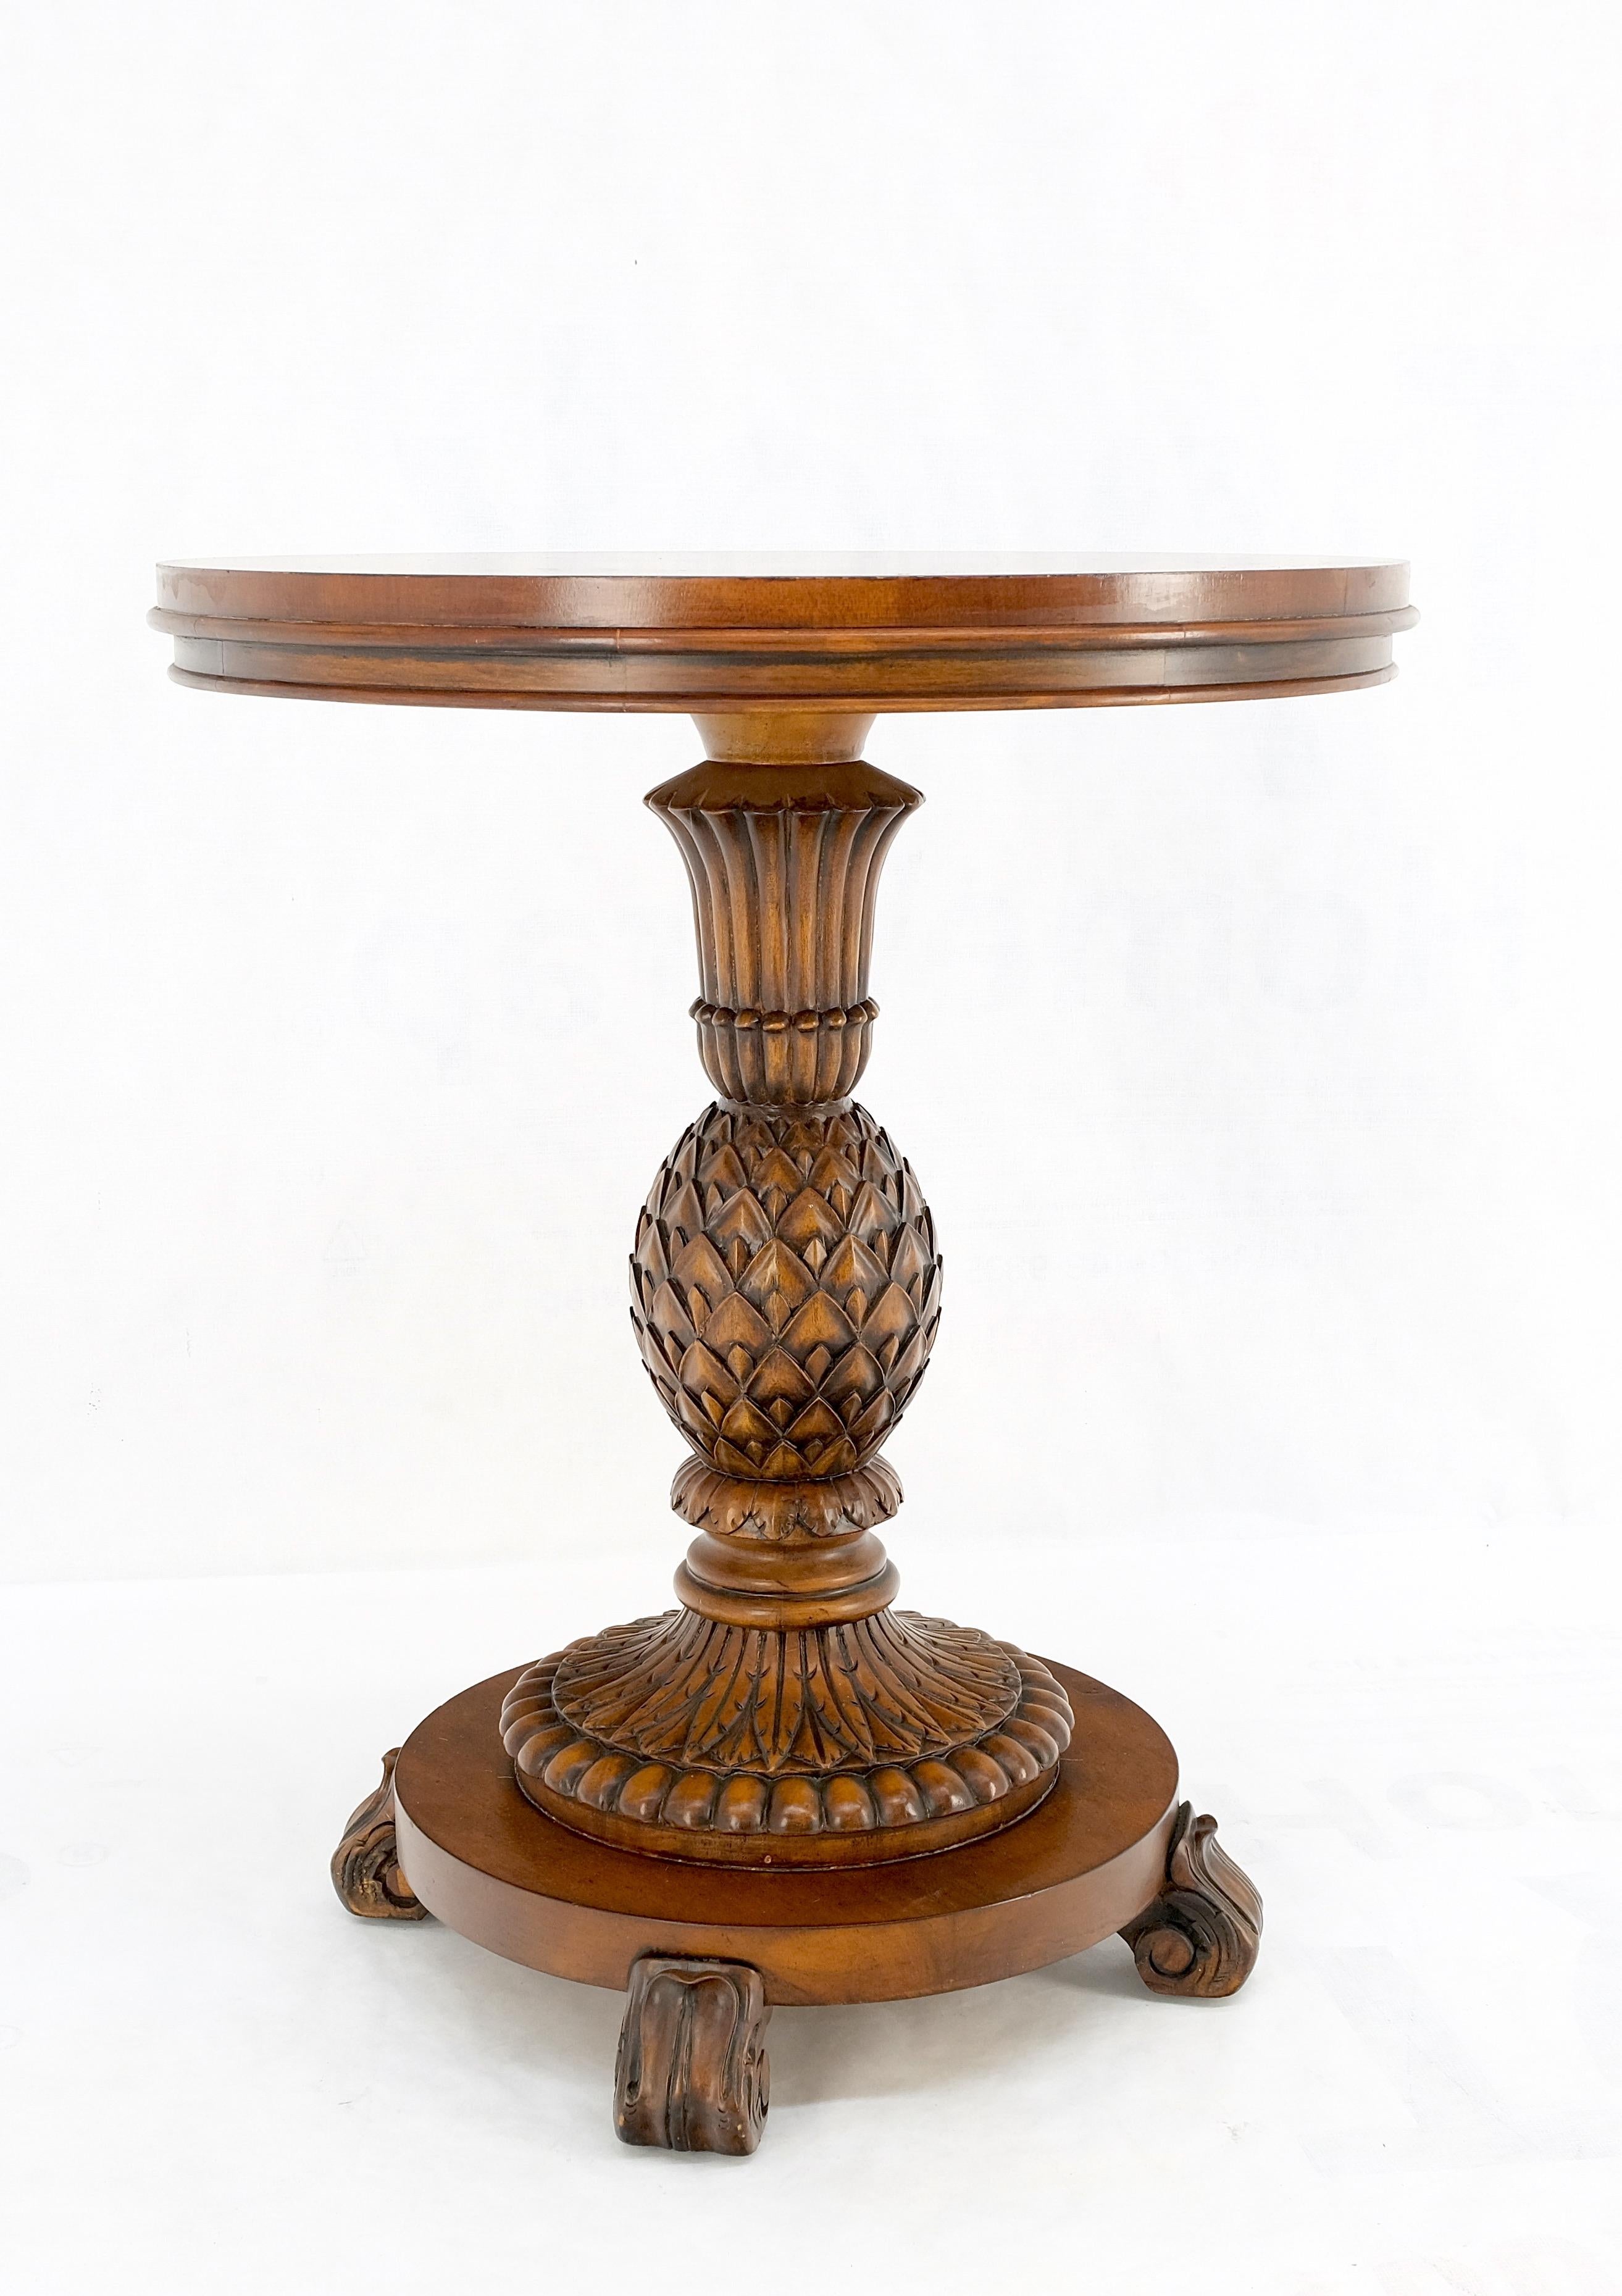 20th Century Carved Pineapple Base Banded Inlaid Top Round Gueridon Table Stand Mint!